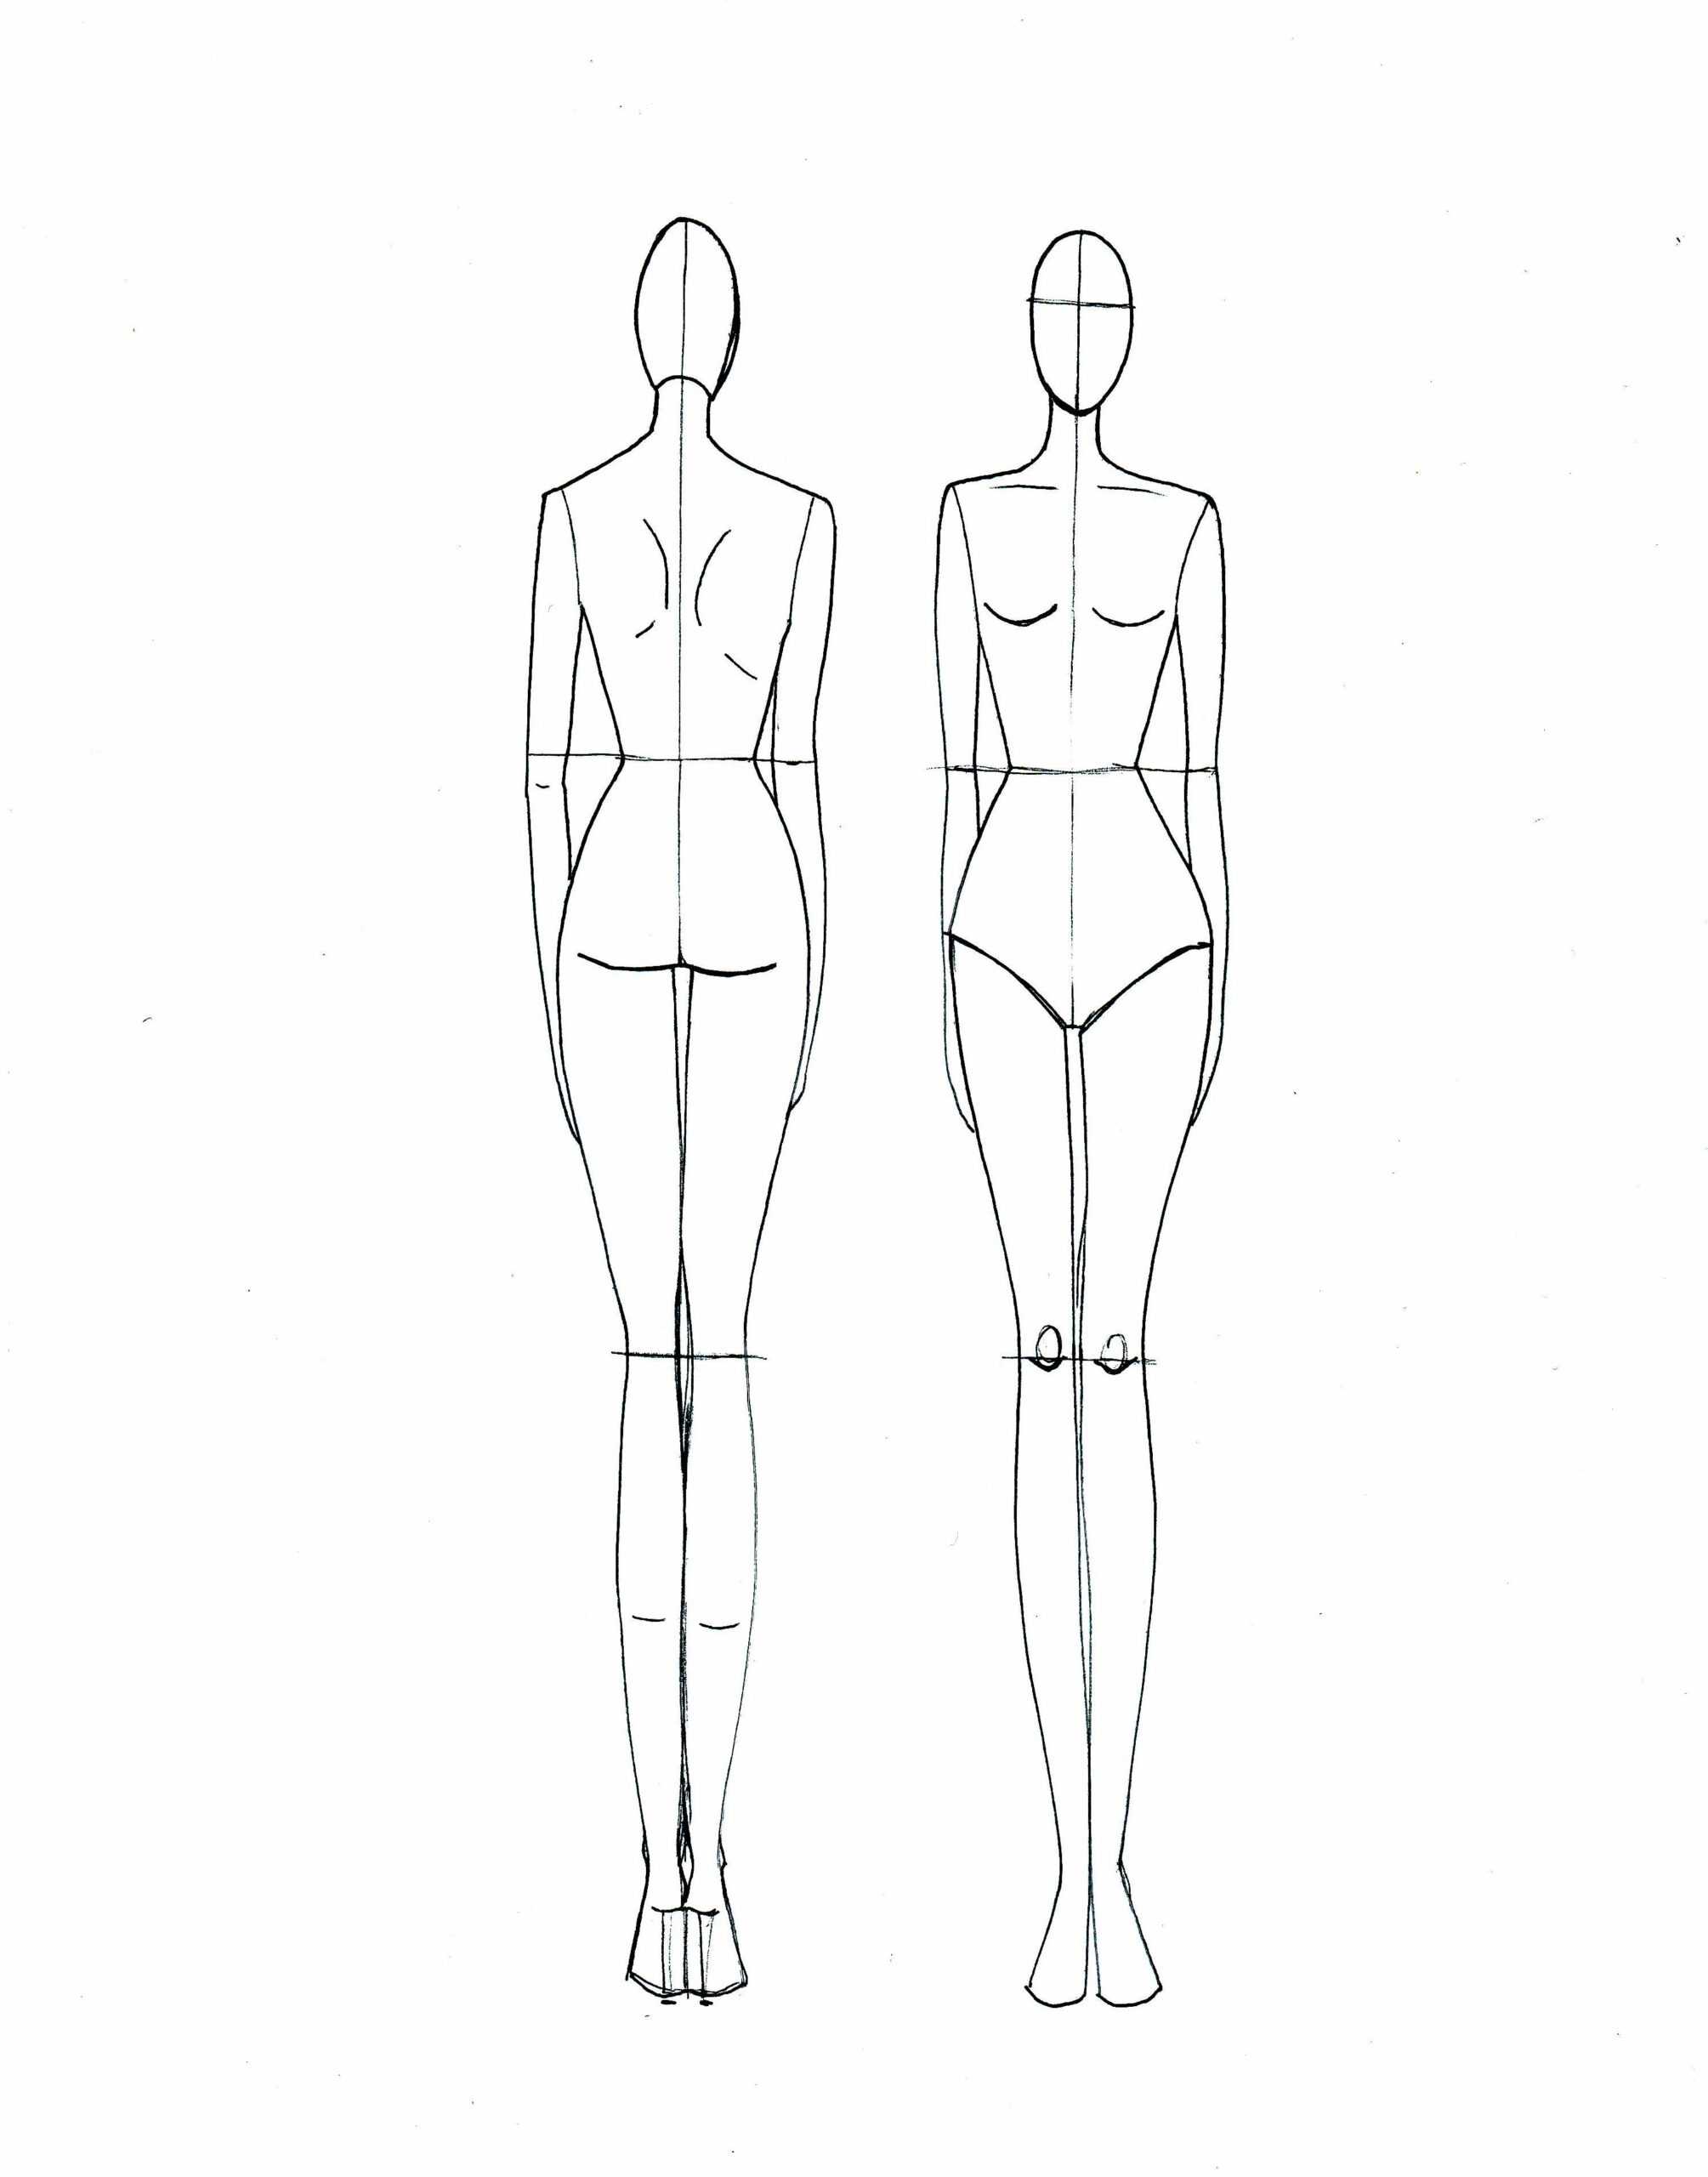 Clothing Model Sketch At Paintingvalley | Explore Intended For Blank Model Sketch Template